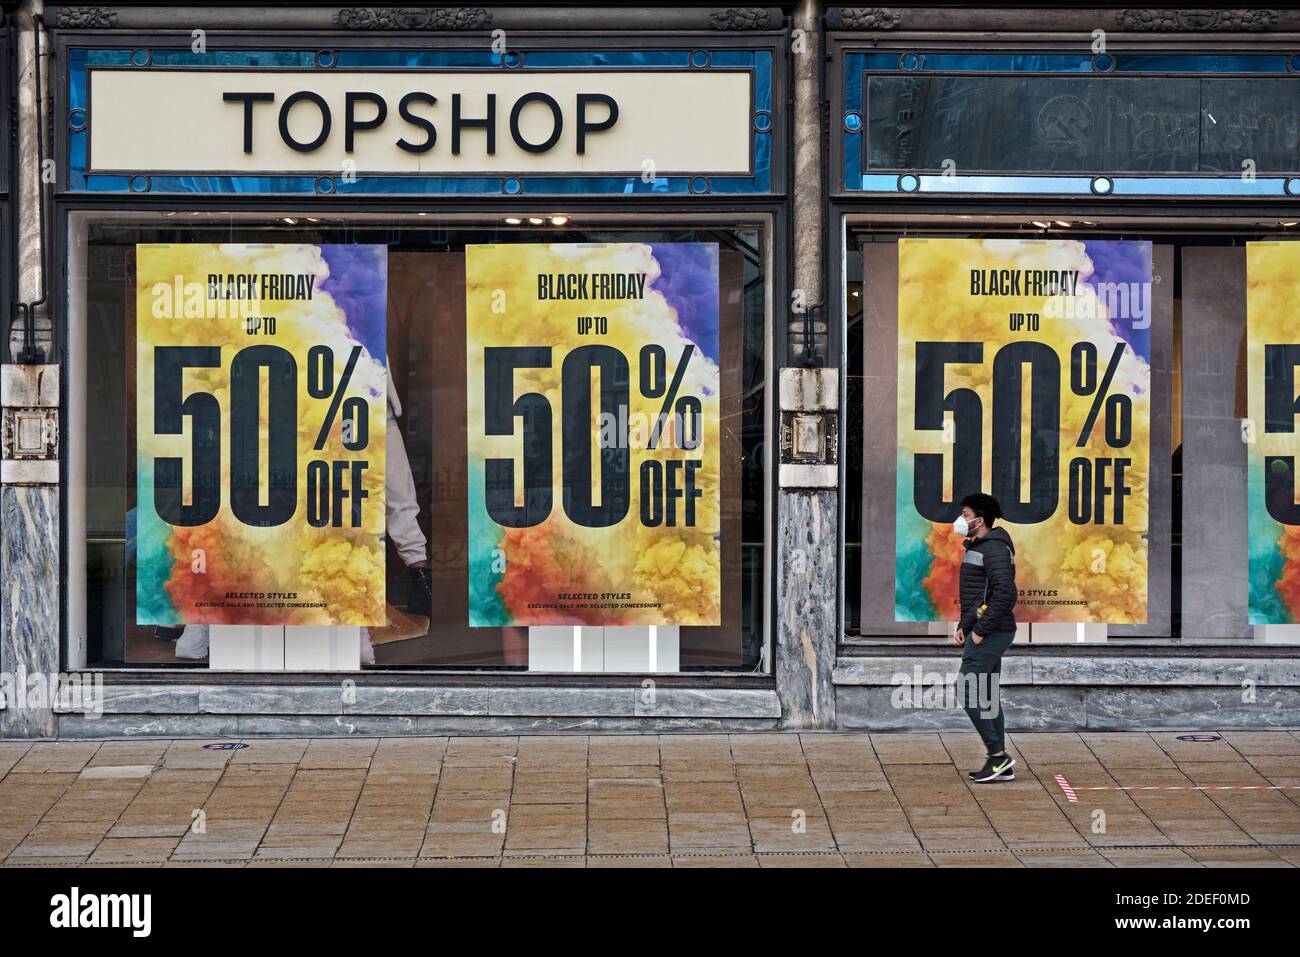 Black Friday adverts in the window of Topshop,part of Sir Philip Green's retail empire Arcadia, now in administration. Princes Street, Edinburgh. Stock Photo